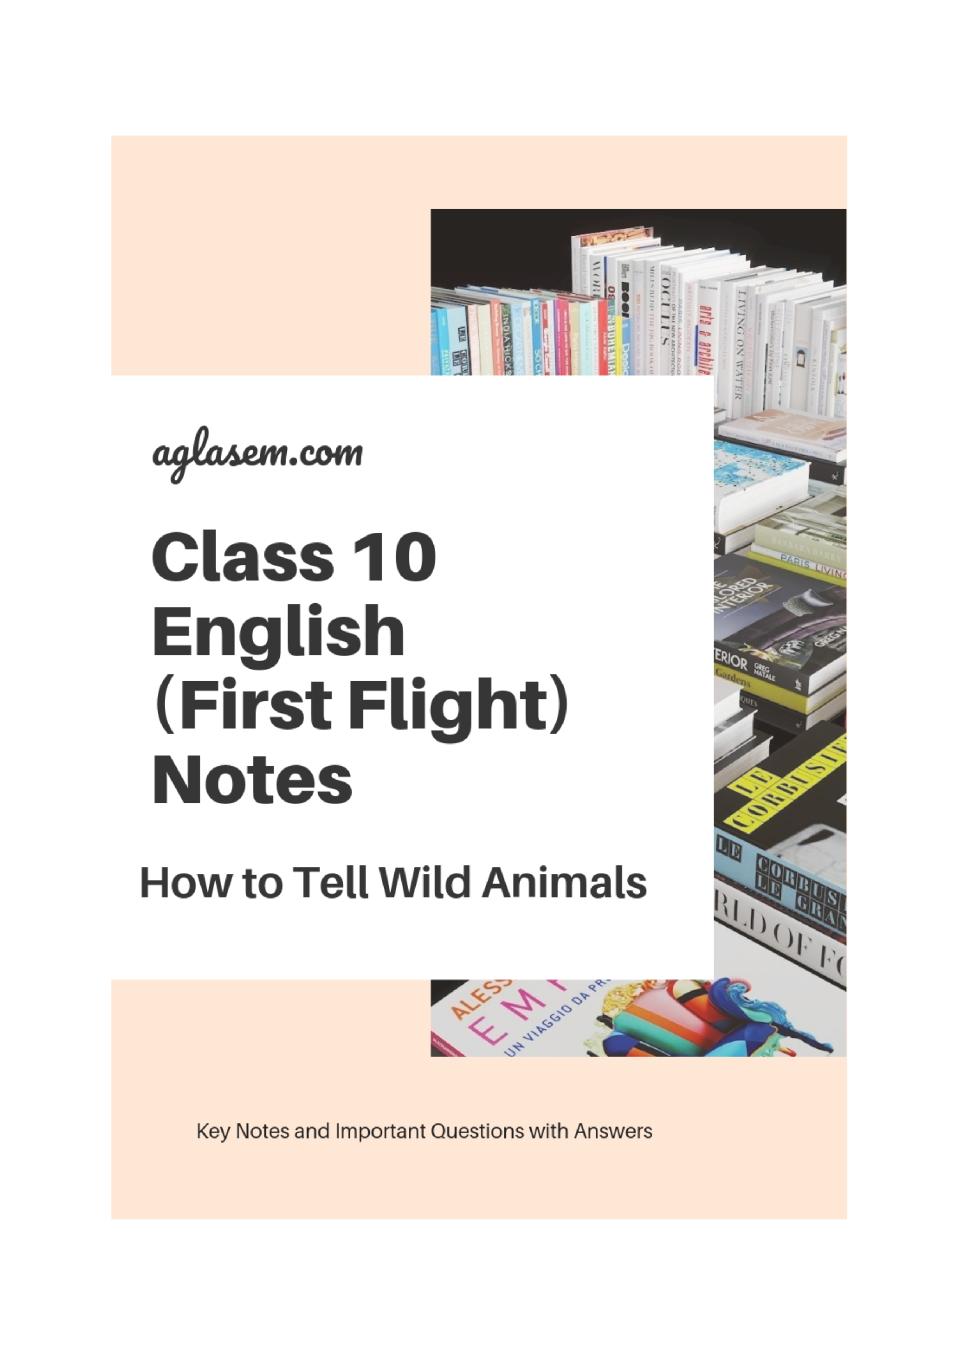 Class 10 English Notes How to Tell Wild Animals